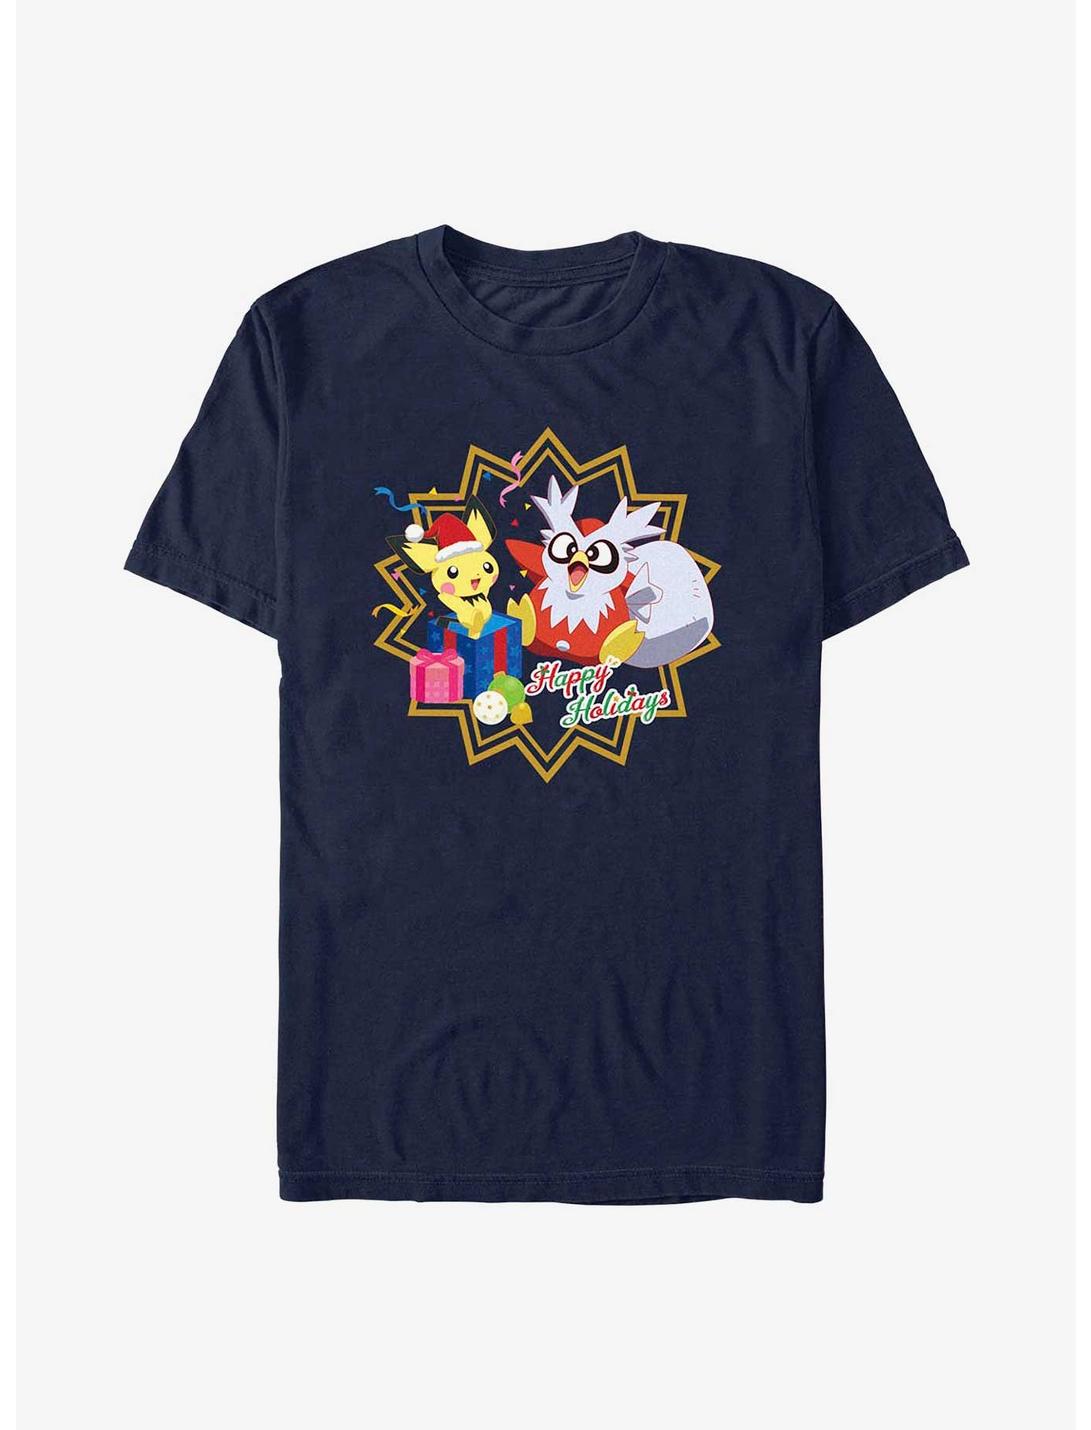 Pokémon Pichu And Delibird Holiday Party T-Shirt, NAVY, hi-res